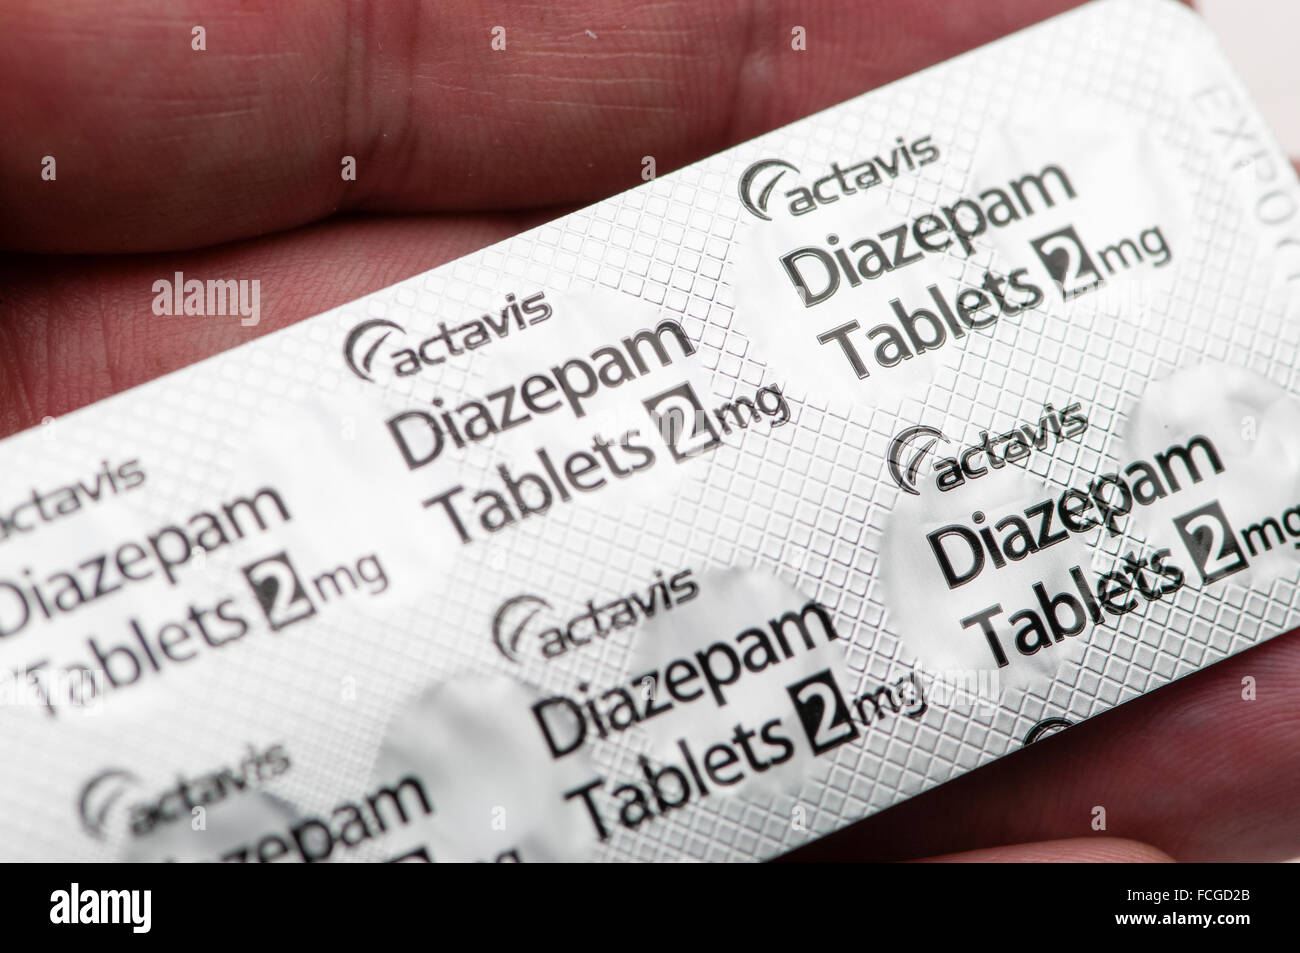 2mg back diazepam pain for